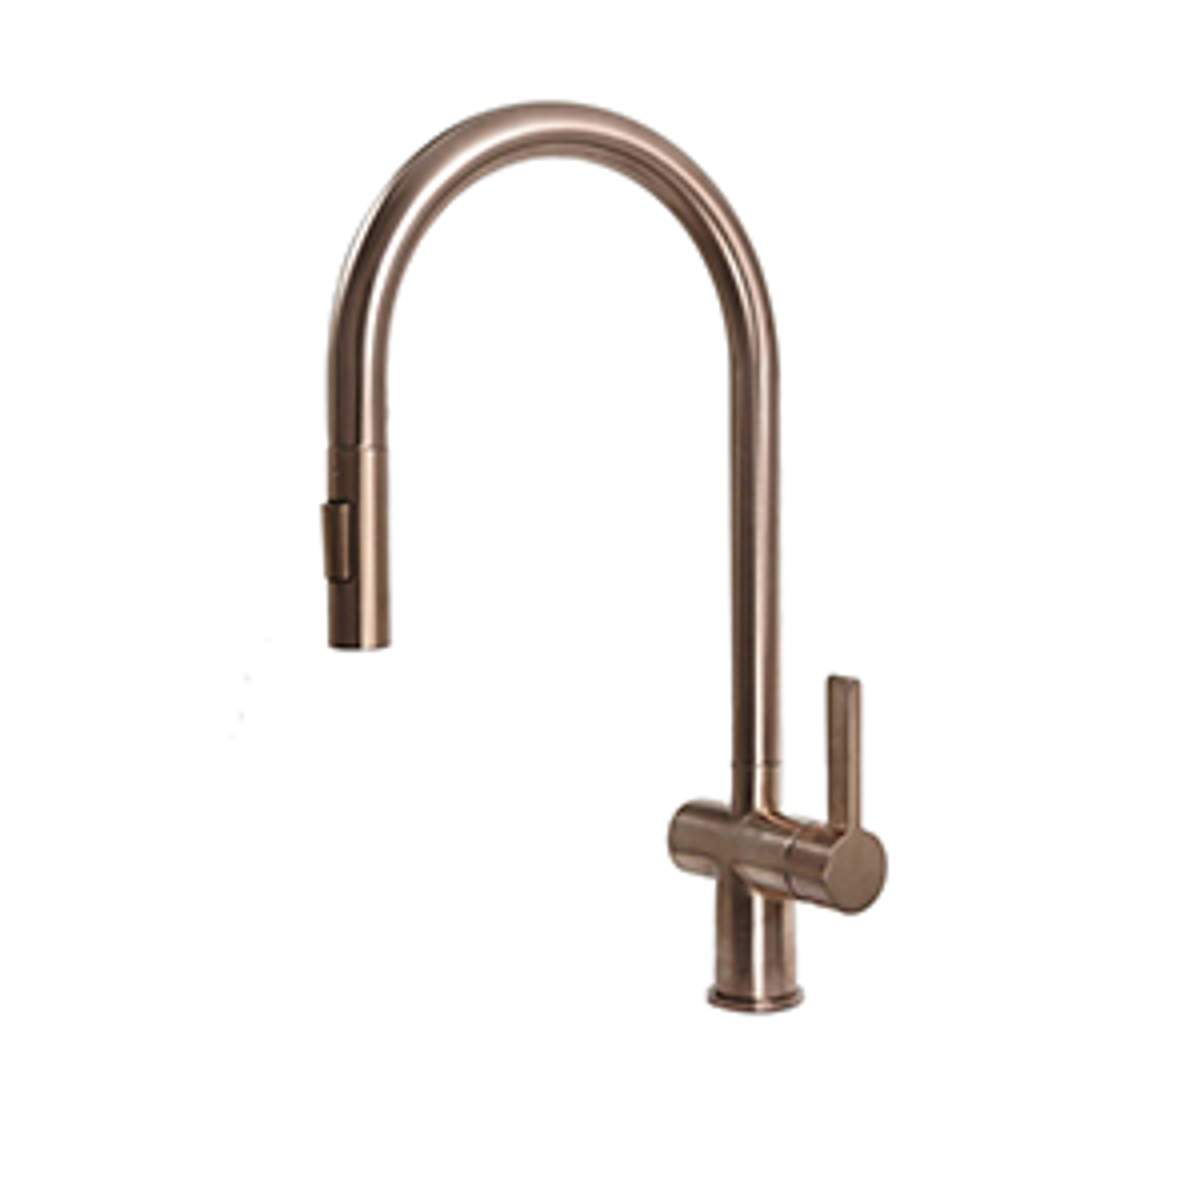 JTP Vos Brushed Bronze Single Lever Pull Out Sink Mixer